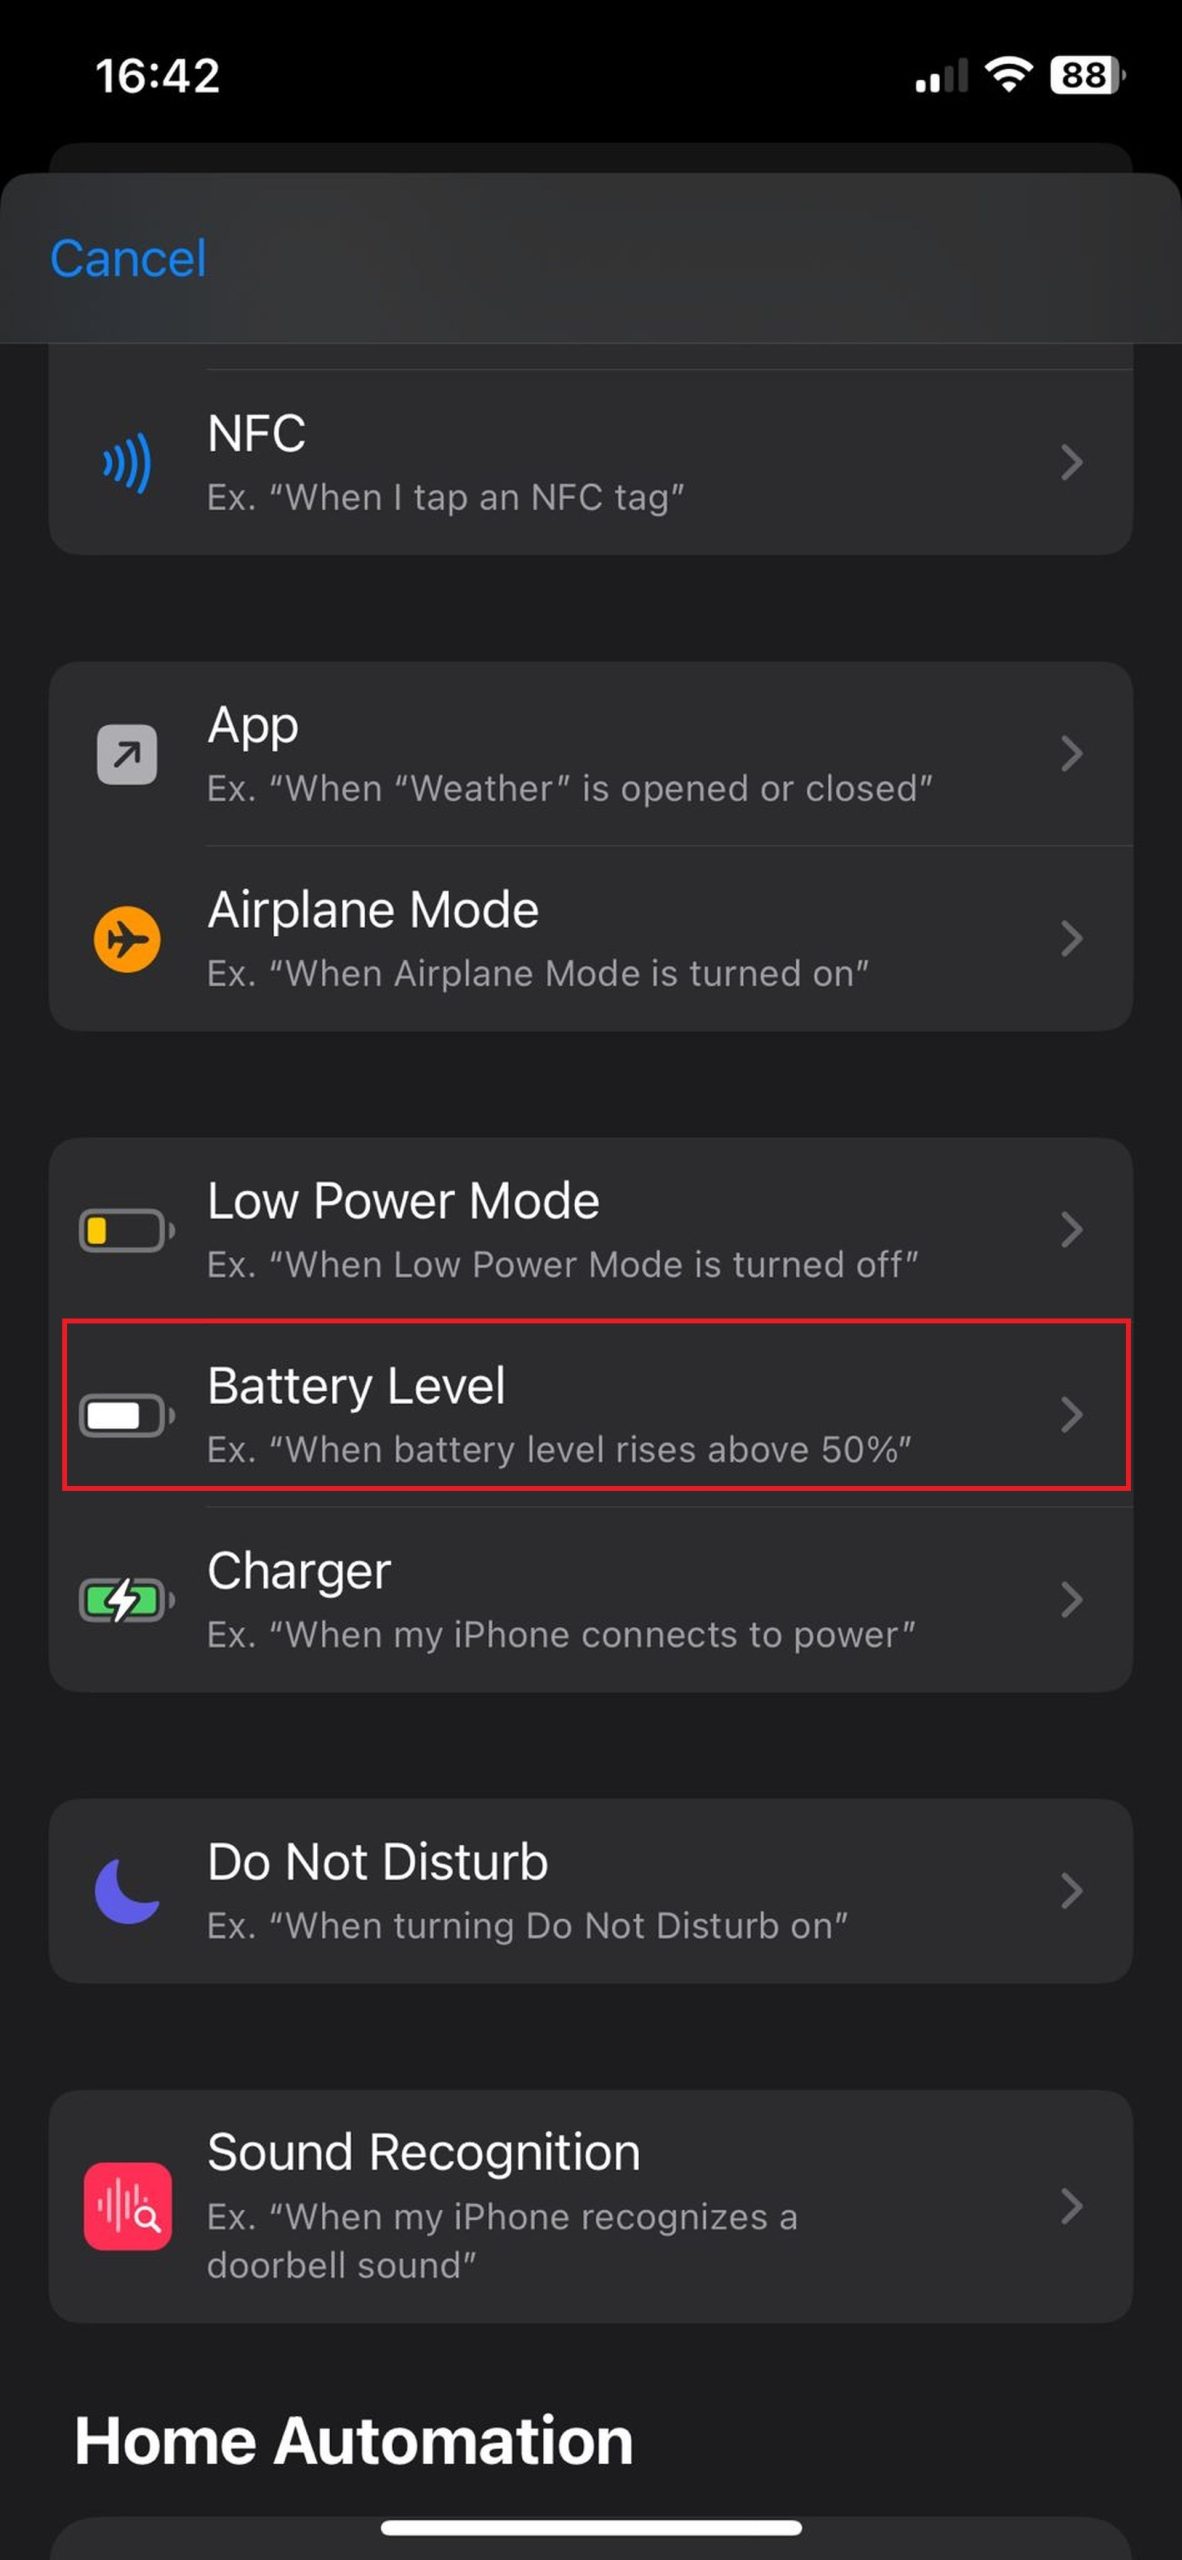 How to create an iPhone battery shortcut?